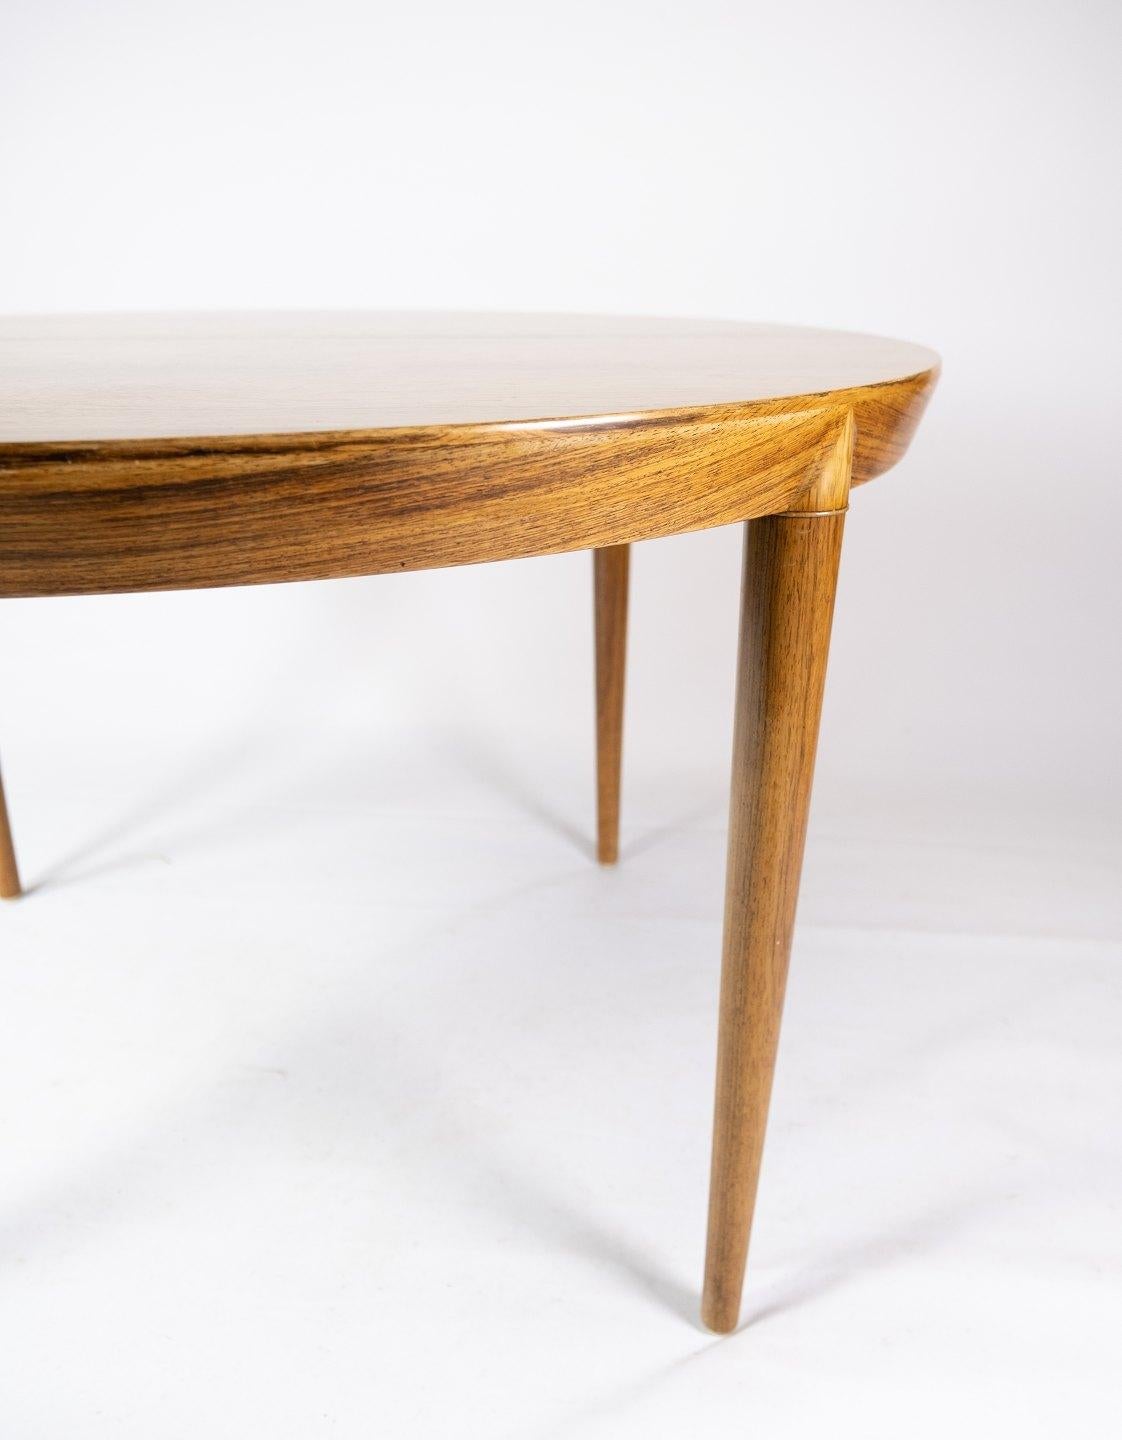 Scandinavian Modern Dining Table in Rosewood of Danish Design from the 1960s For Sale